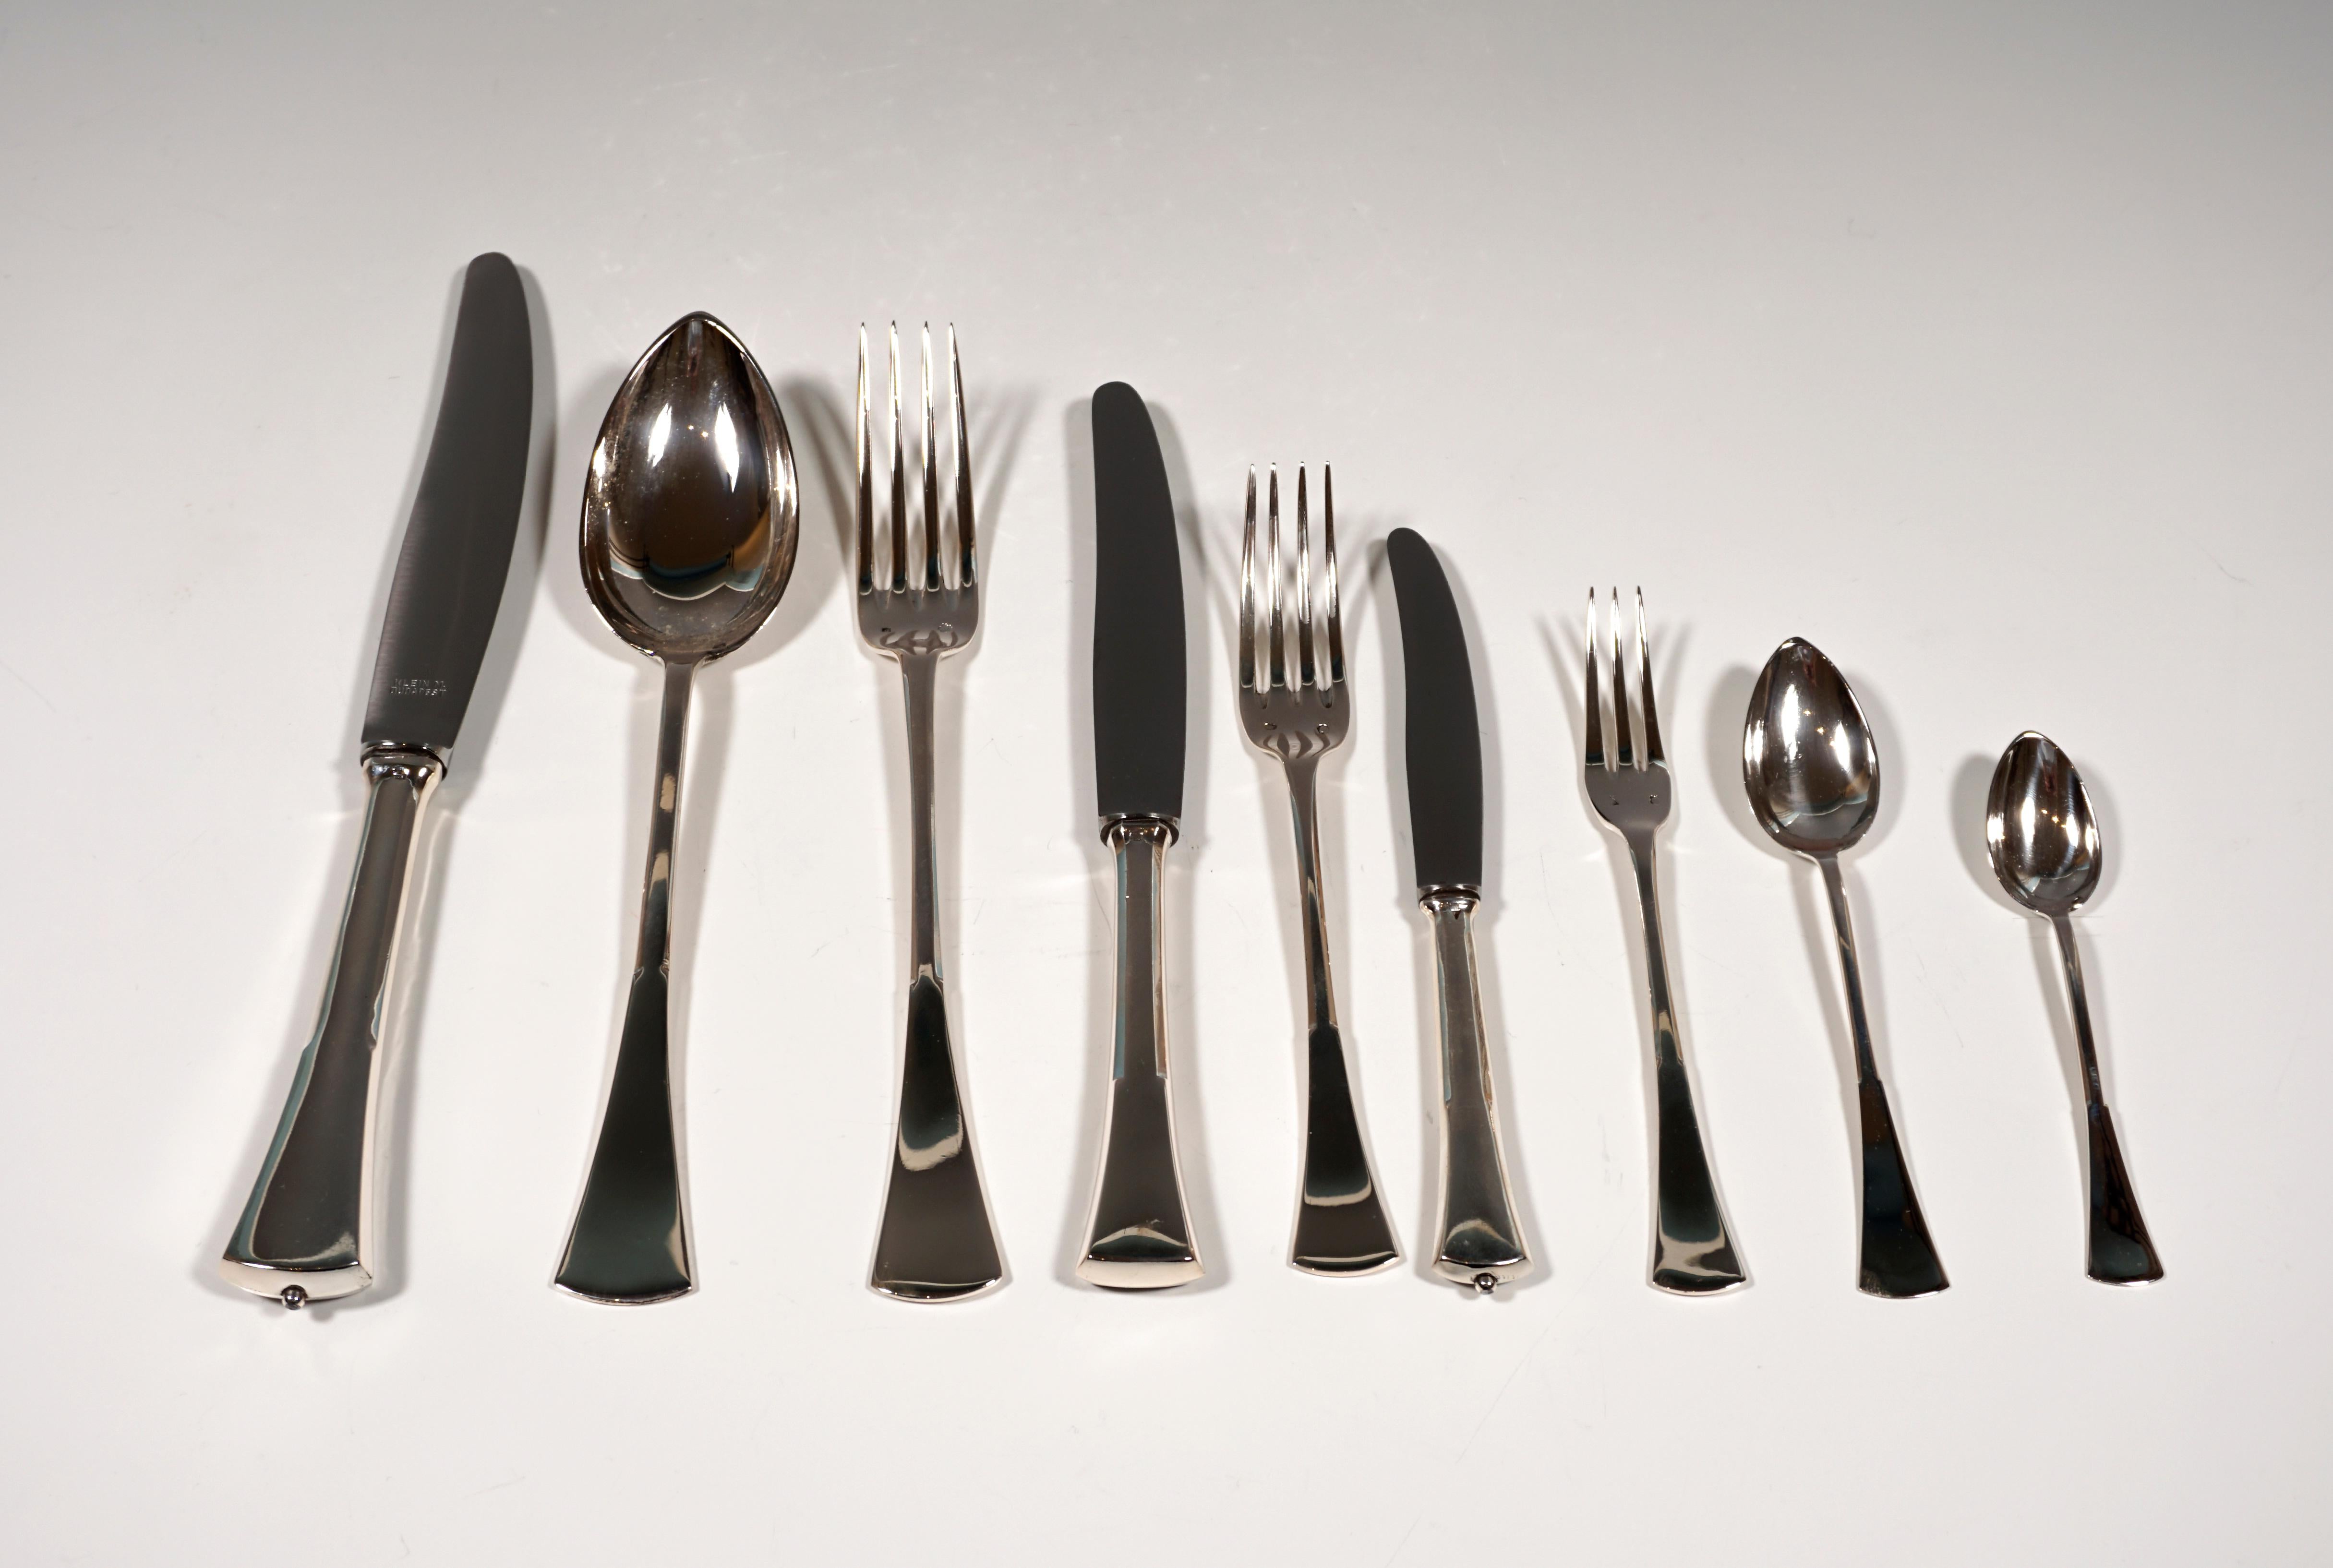 Art Nouveau Silver Cutlery Set For 12 People In Showcase, Austria-Hungary, 1920 2